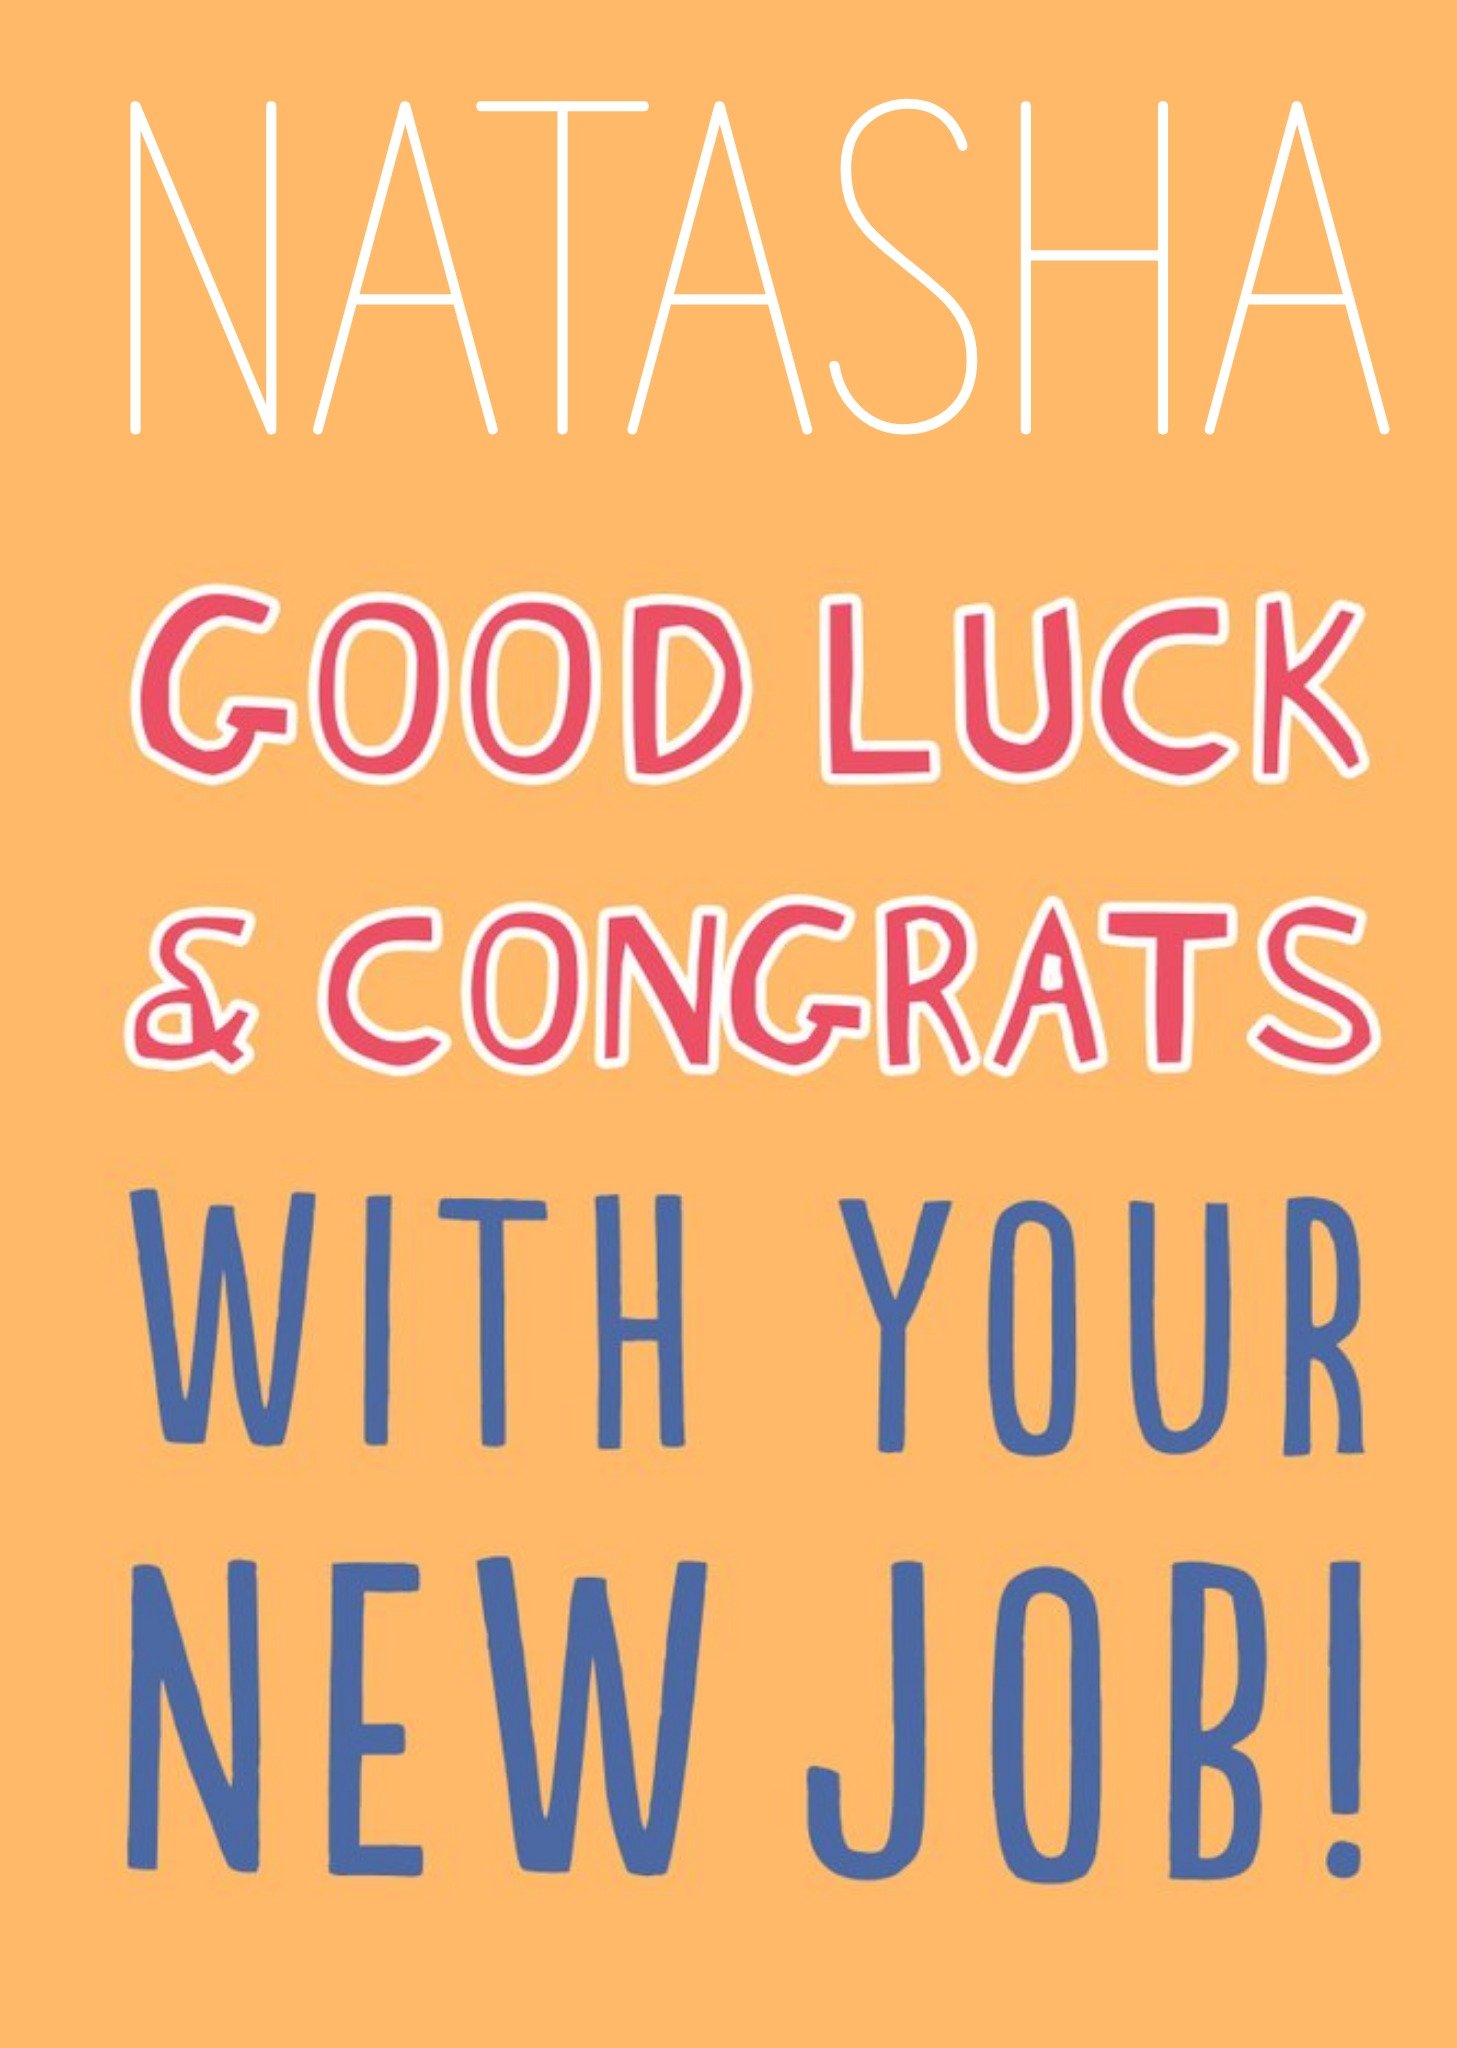 Moonpig Big Bold Type Typographic Good Luck And Congrats With Your New Job Card, Large